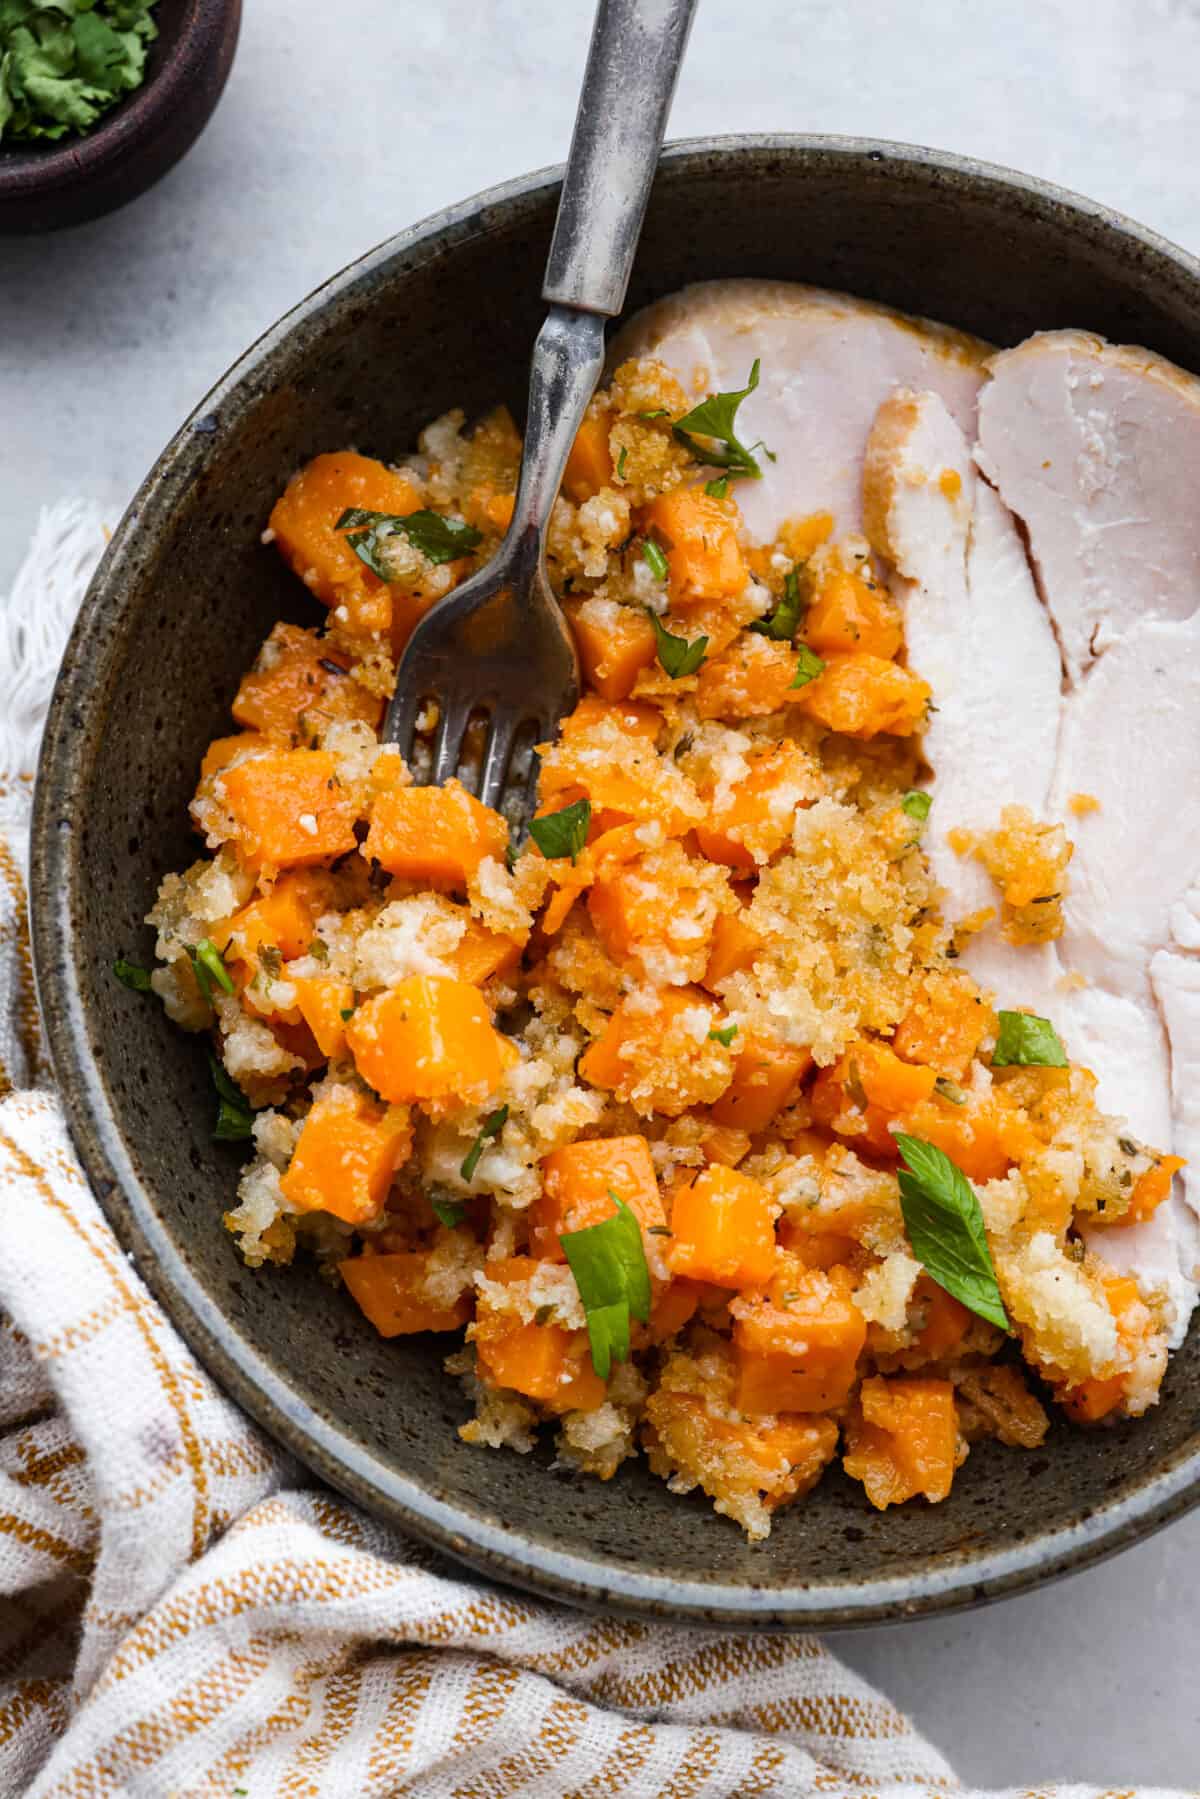 Turkey and sweet potato casserole served in a gray bowl.